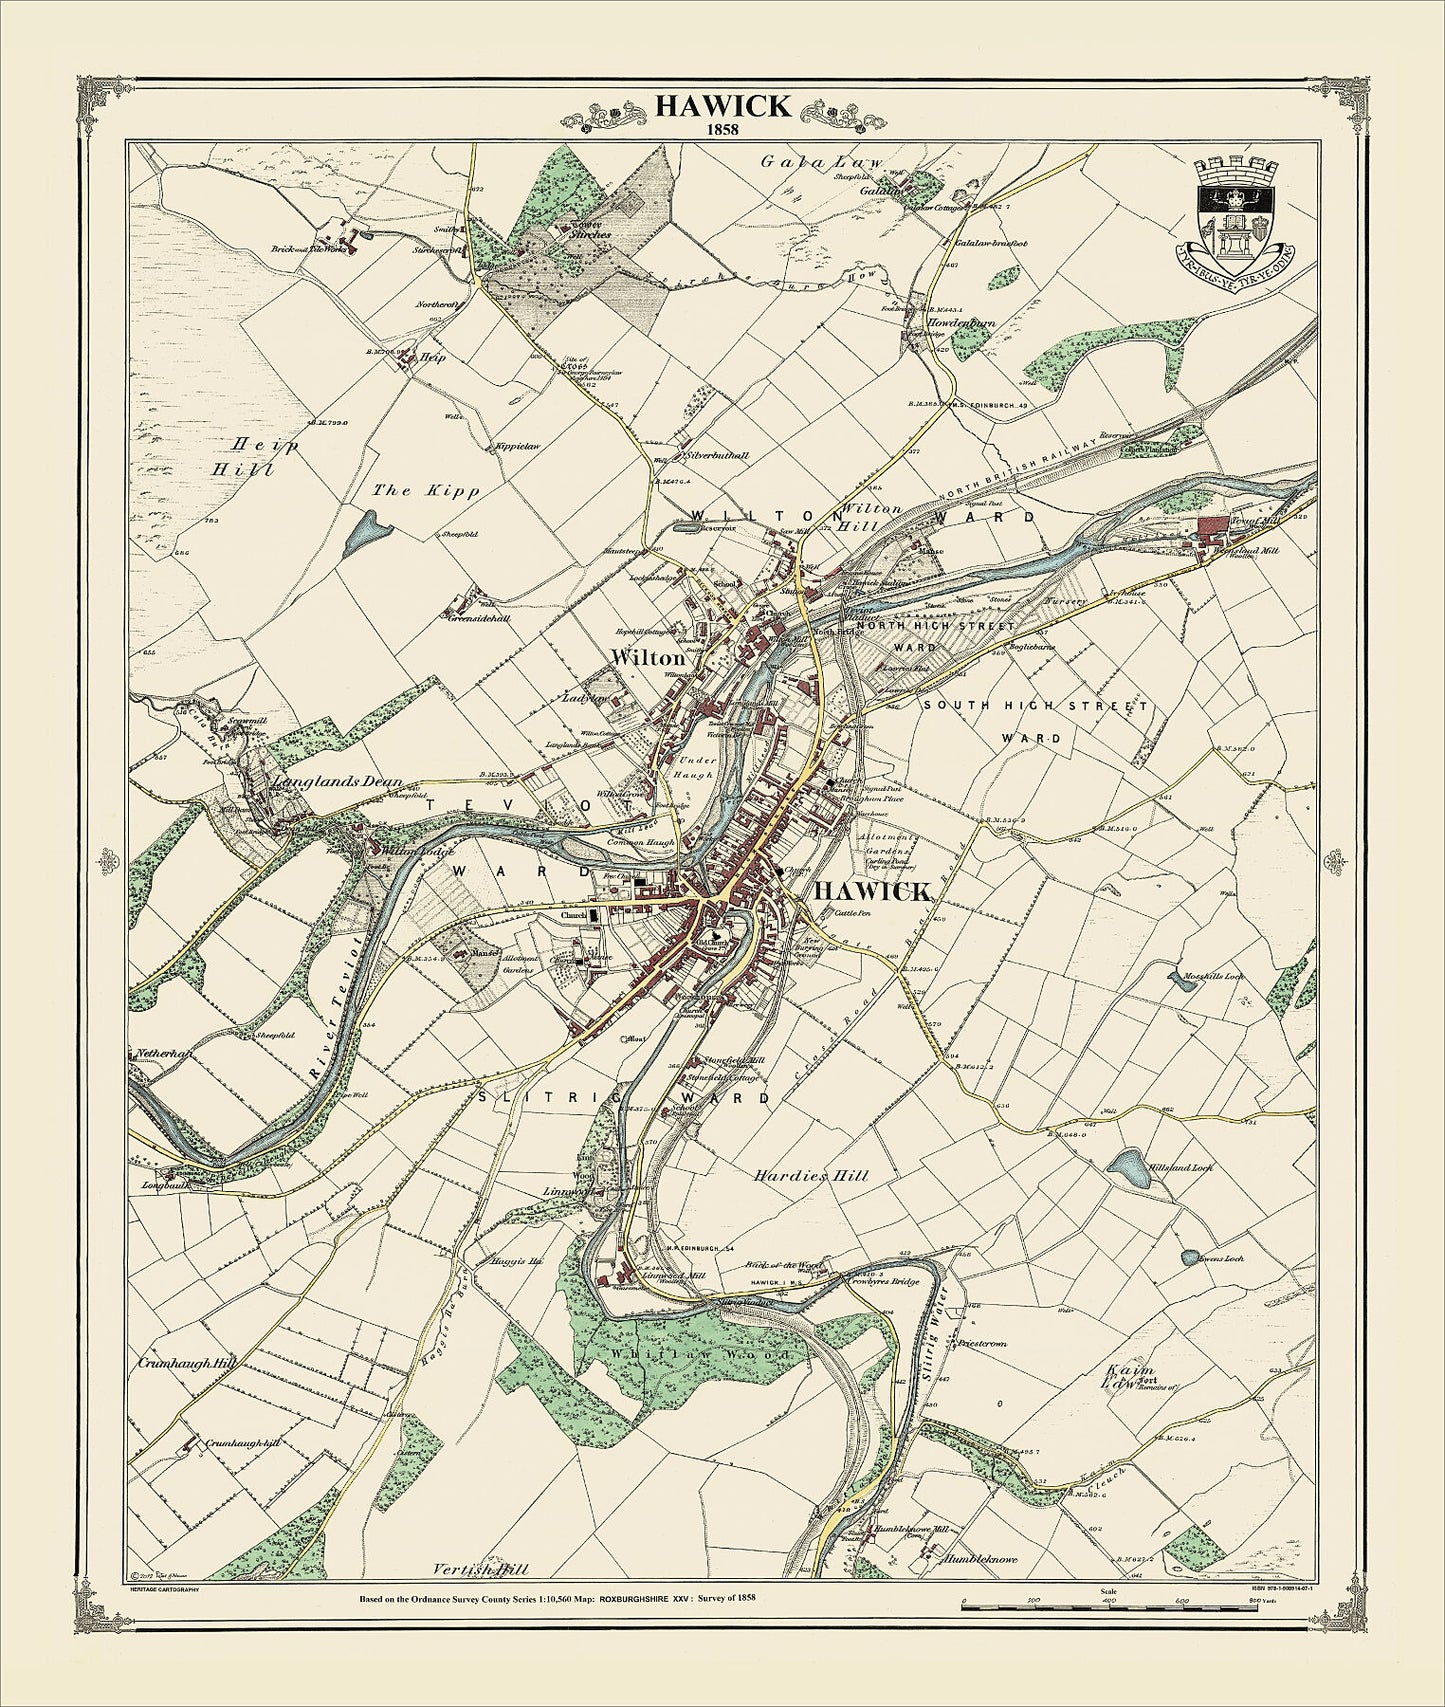 Coloured Victorian map of Hawick in 1858 by Peter J Adams of Heritage Cartography